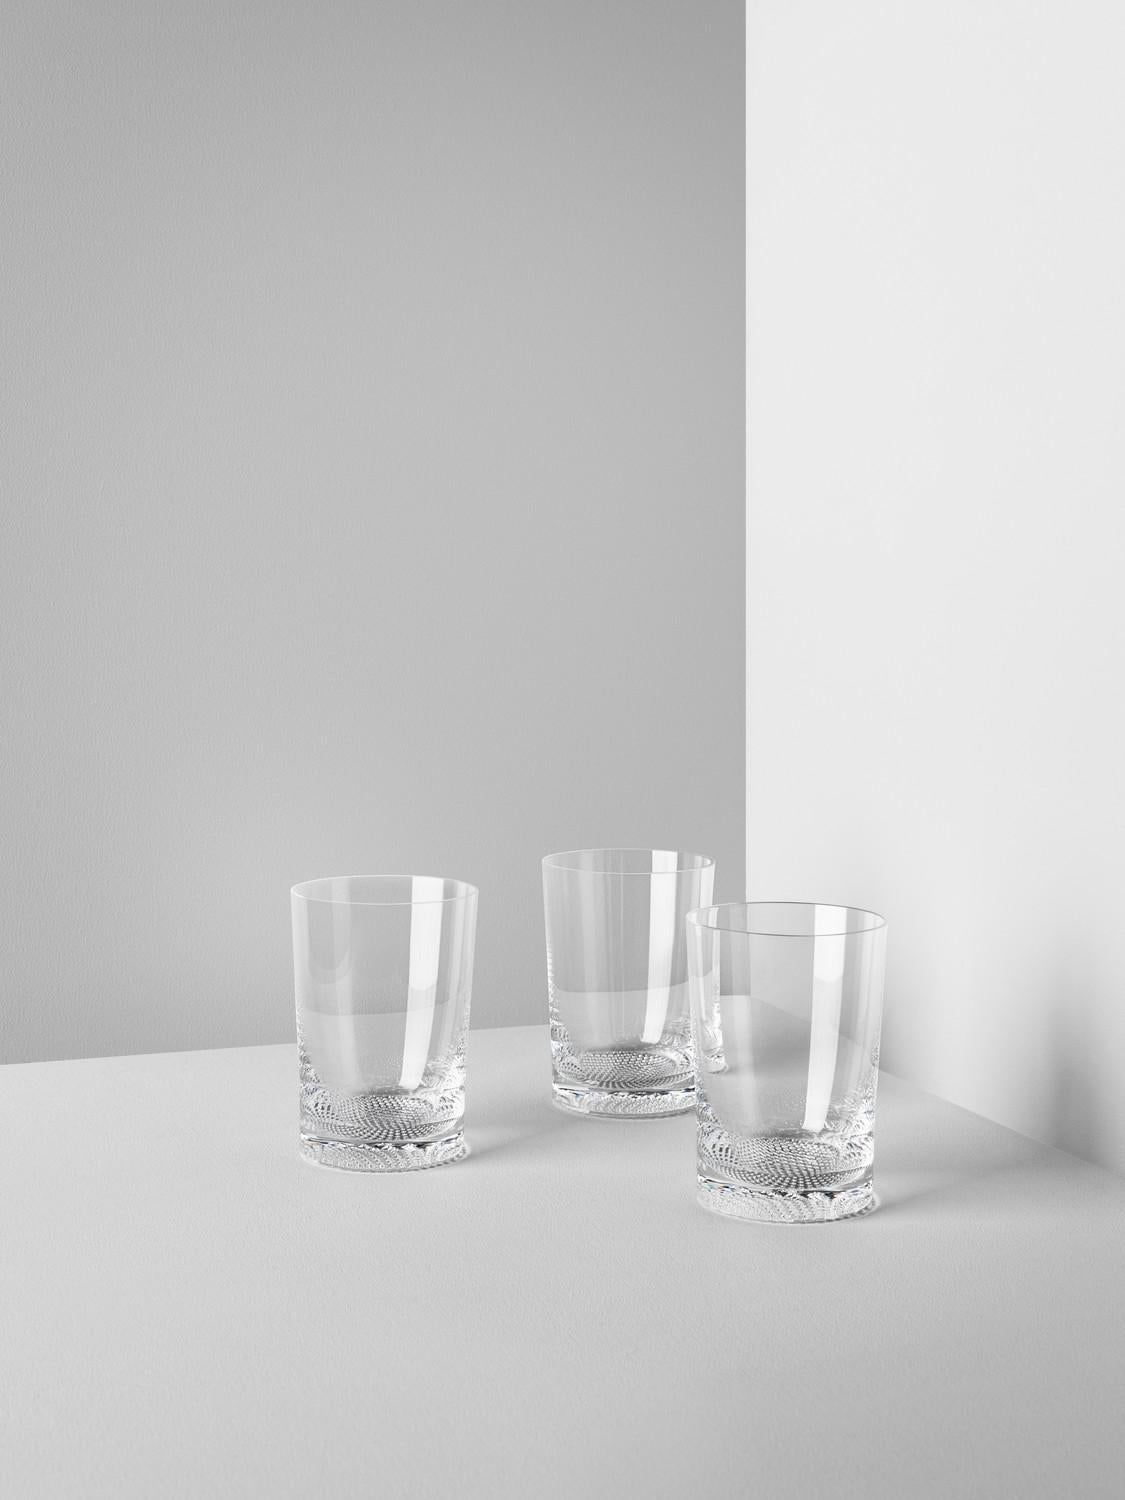 Like all the items in the Limelight collection, this glass has the distinctive, textured base that optically reflects light. The tumbler is great for water or lemonade, and it's even handmade. All the pieces in the collection from Kosta Boda are